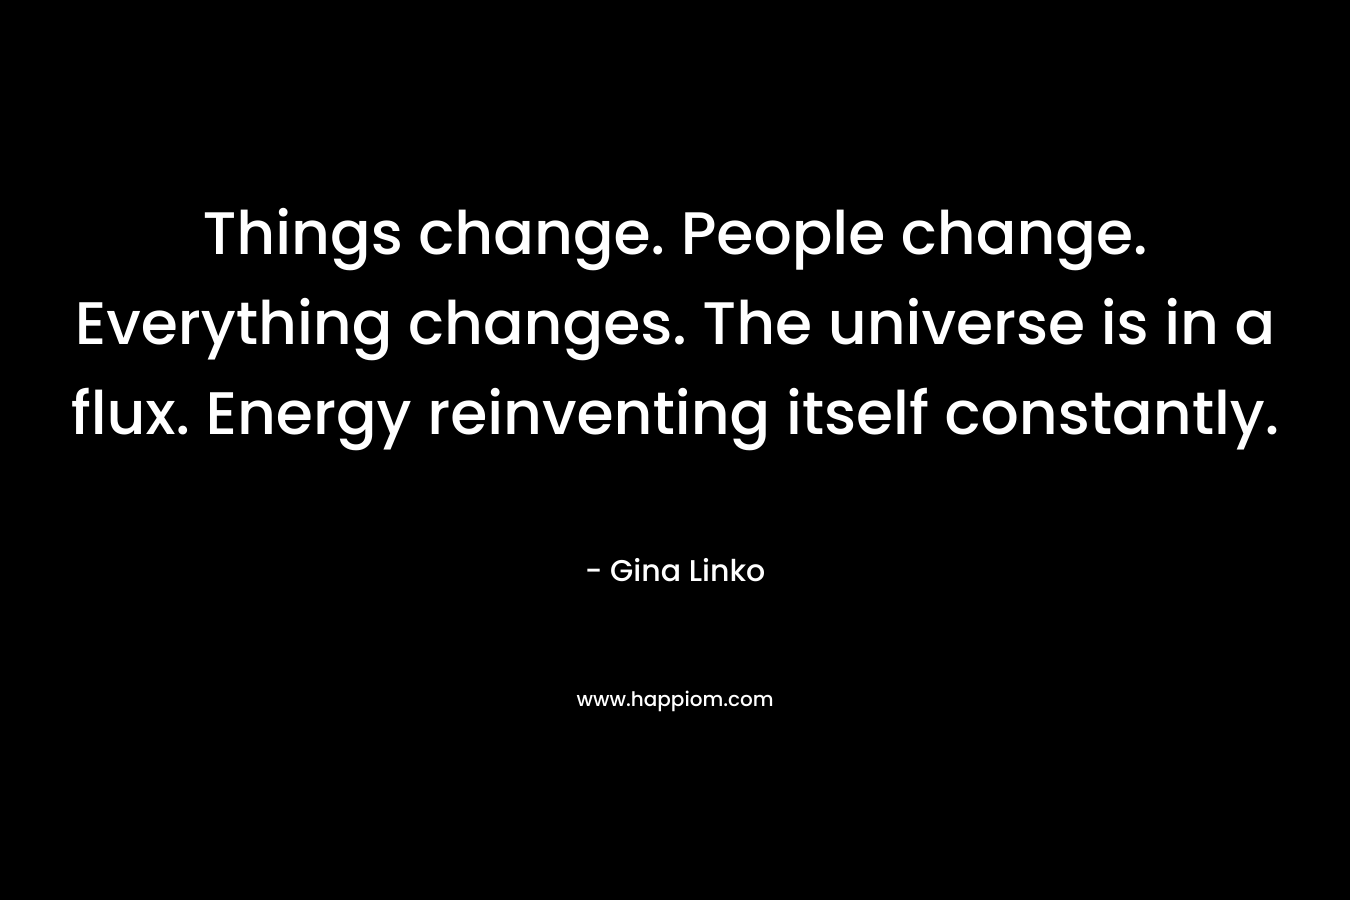 Things change. People change. Everything changes. The universe is in a flux. Energy reinventing itself constantly. – Gina Linko